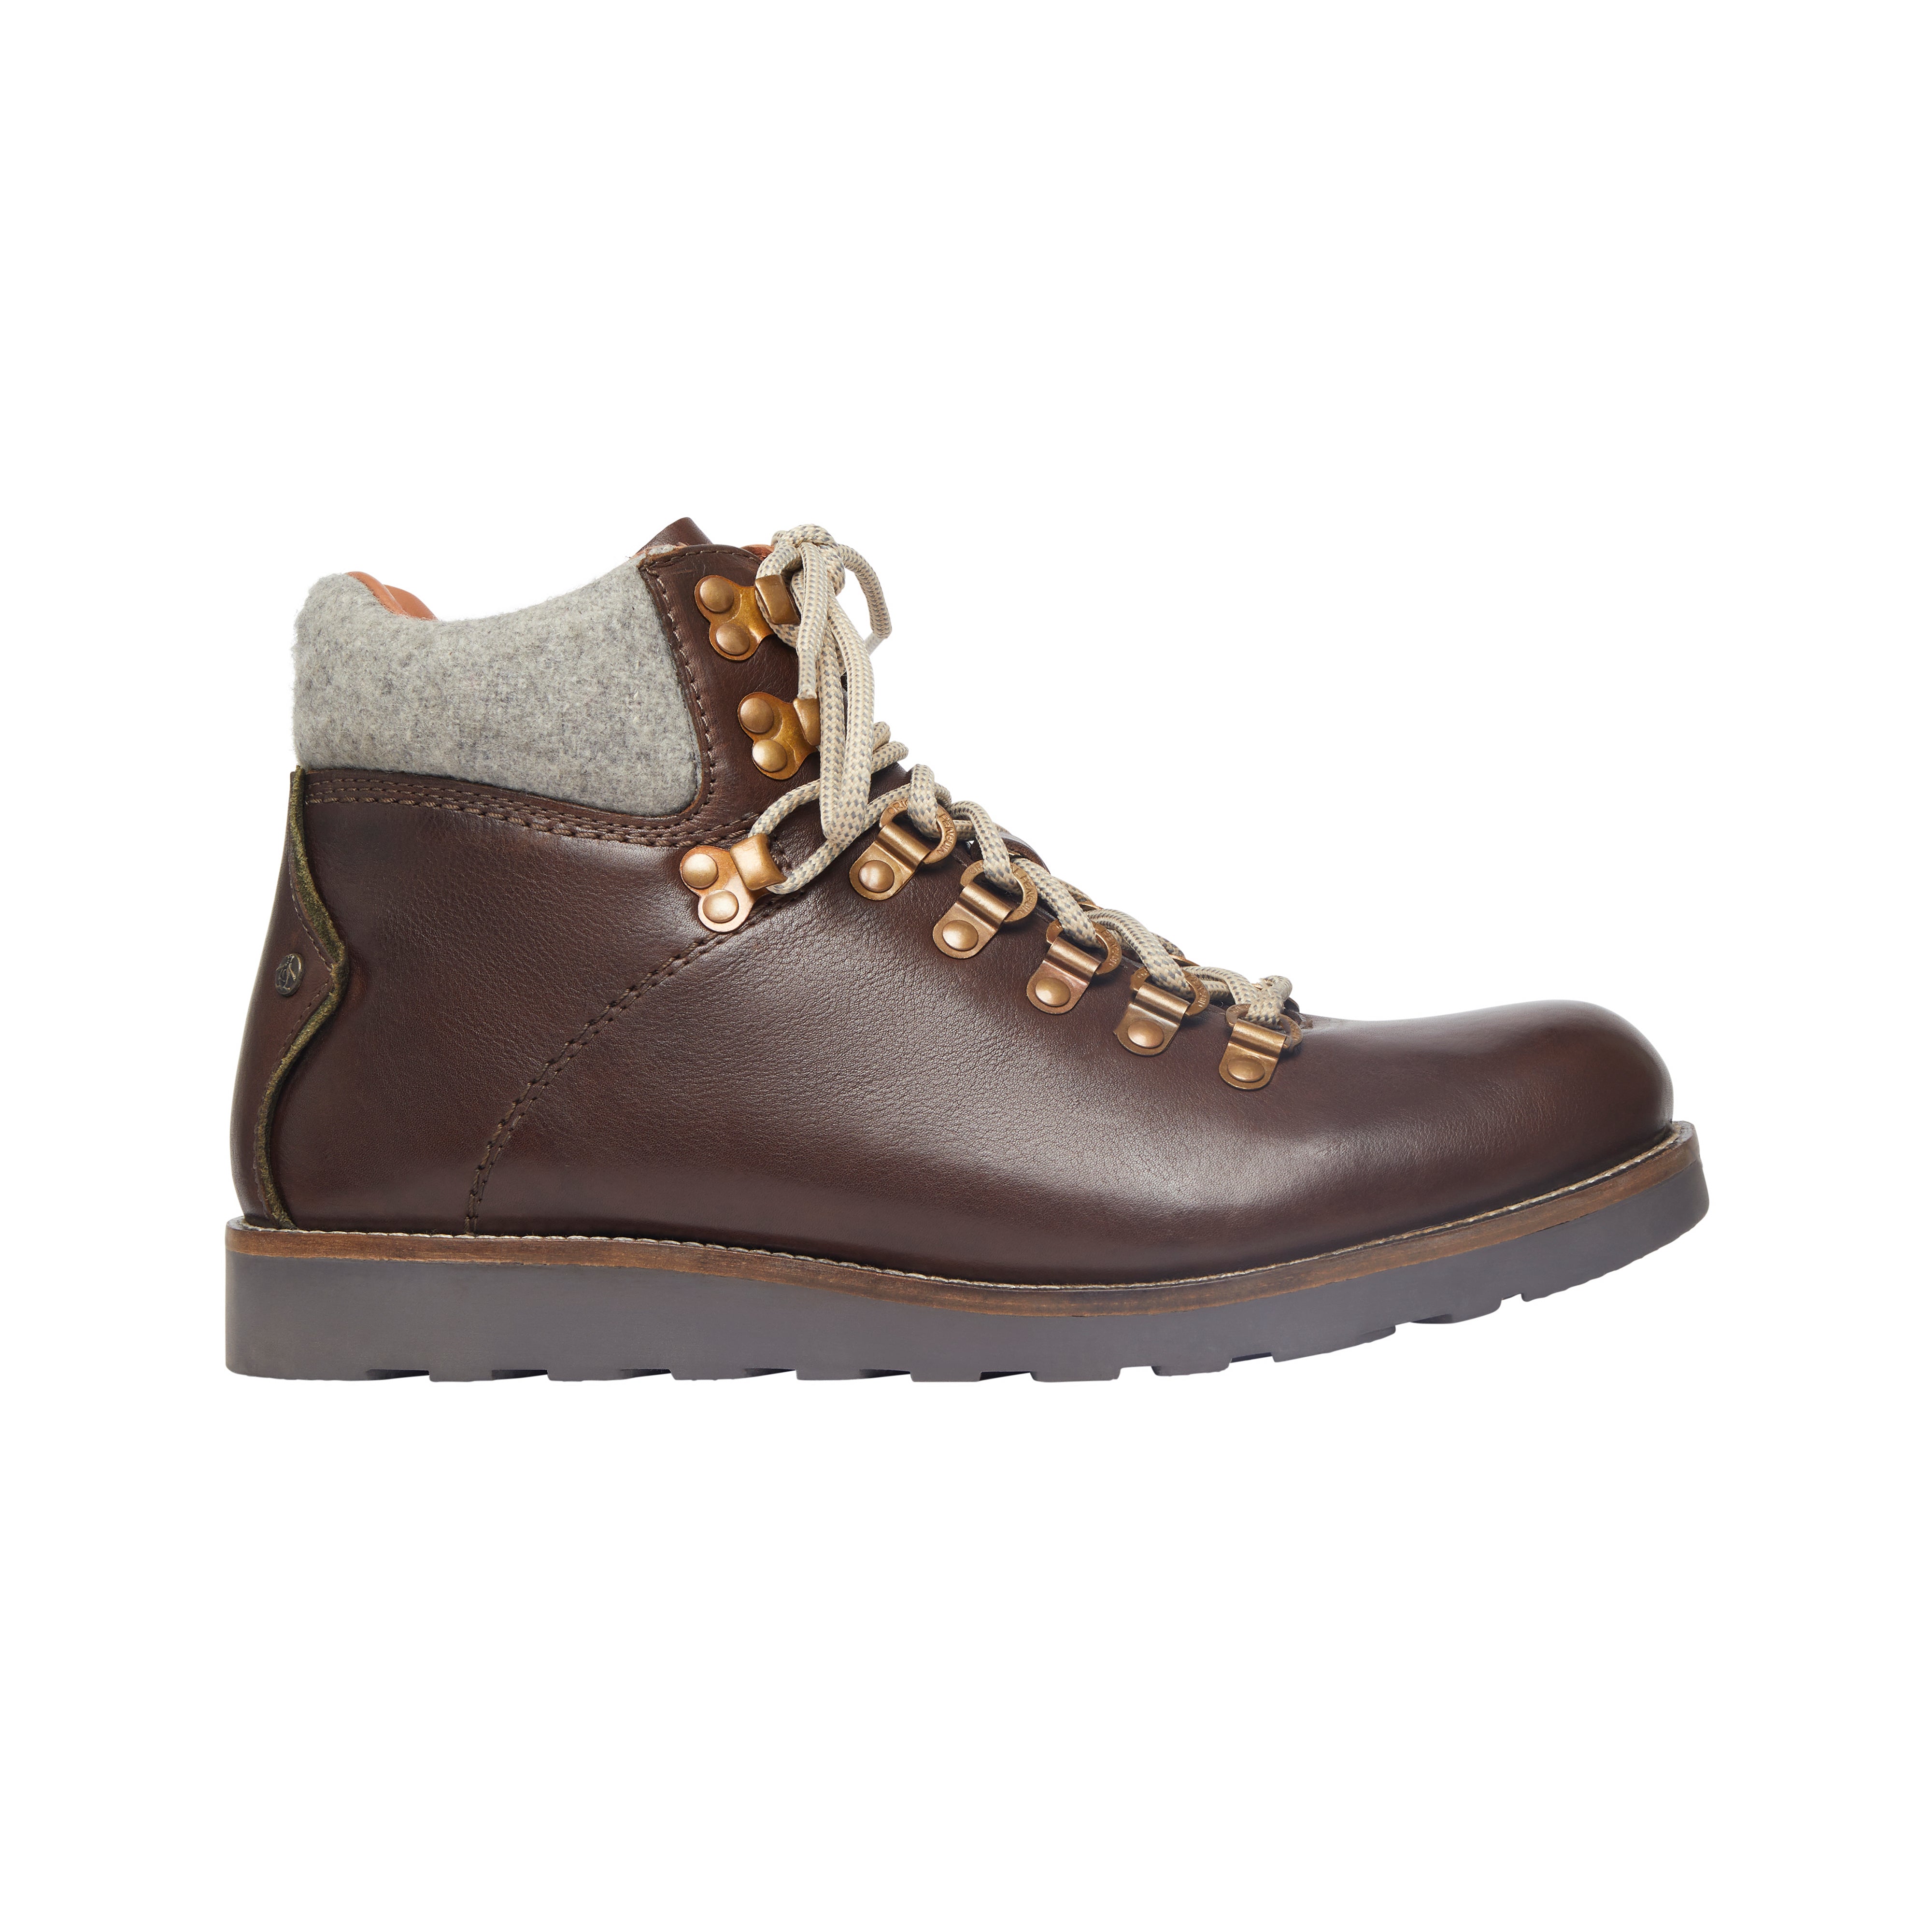 View Original Penguin Anish Boot In Leather Brown Brown Mens information